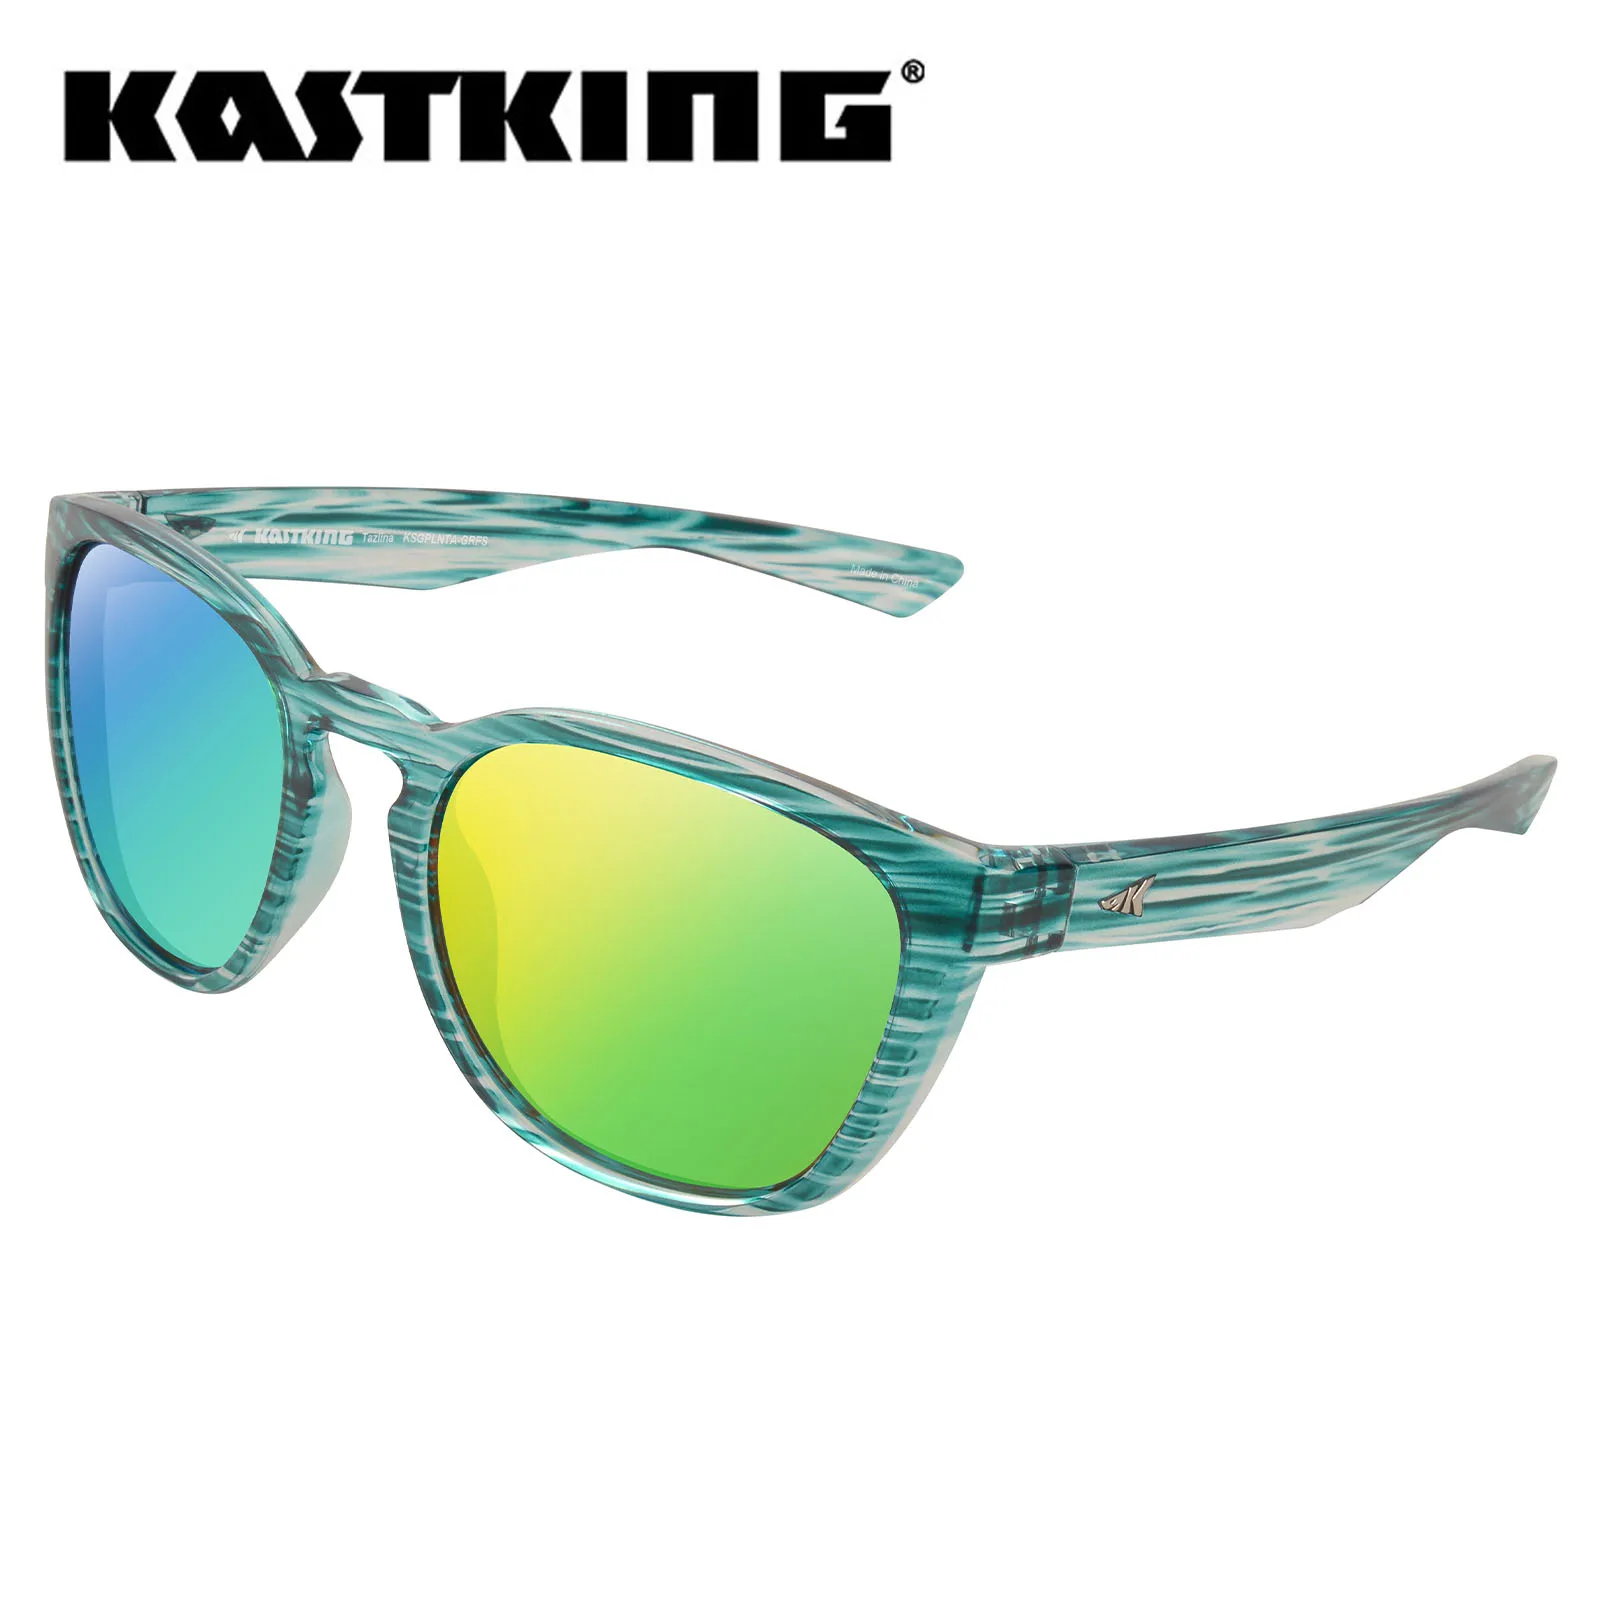 KastKing Tazlina Polarized Sport Sunglasses for Men and Women, Ideal for  Driving Fishing Cycling and Running,UV Protection